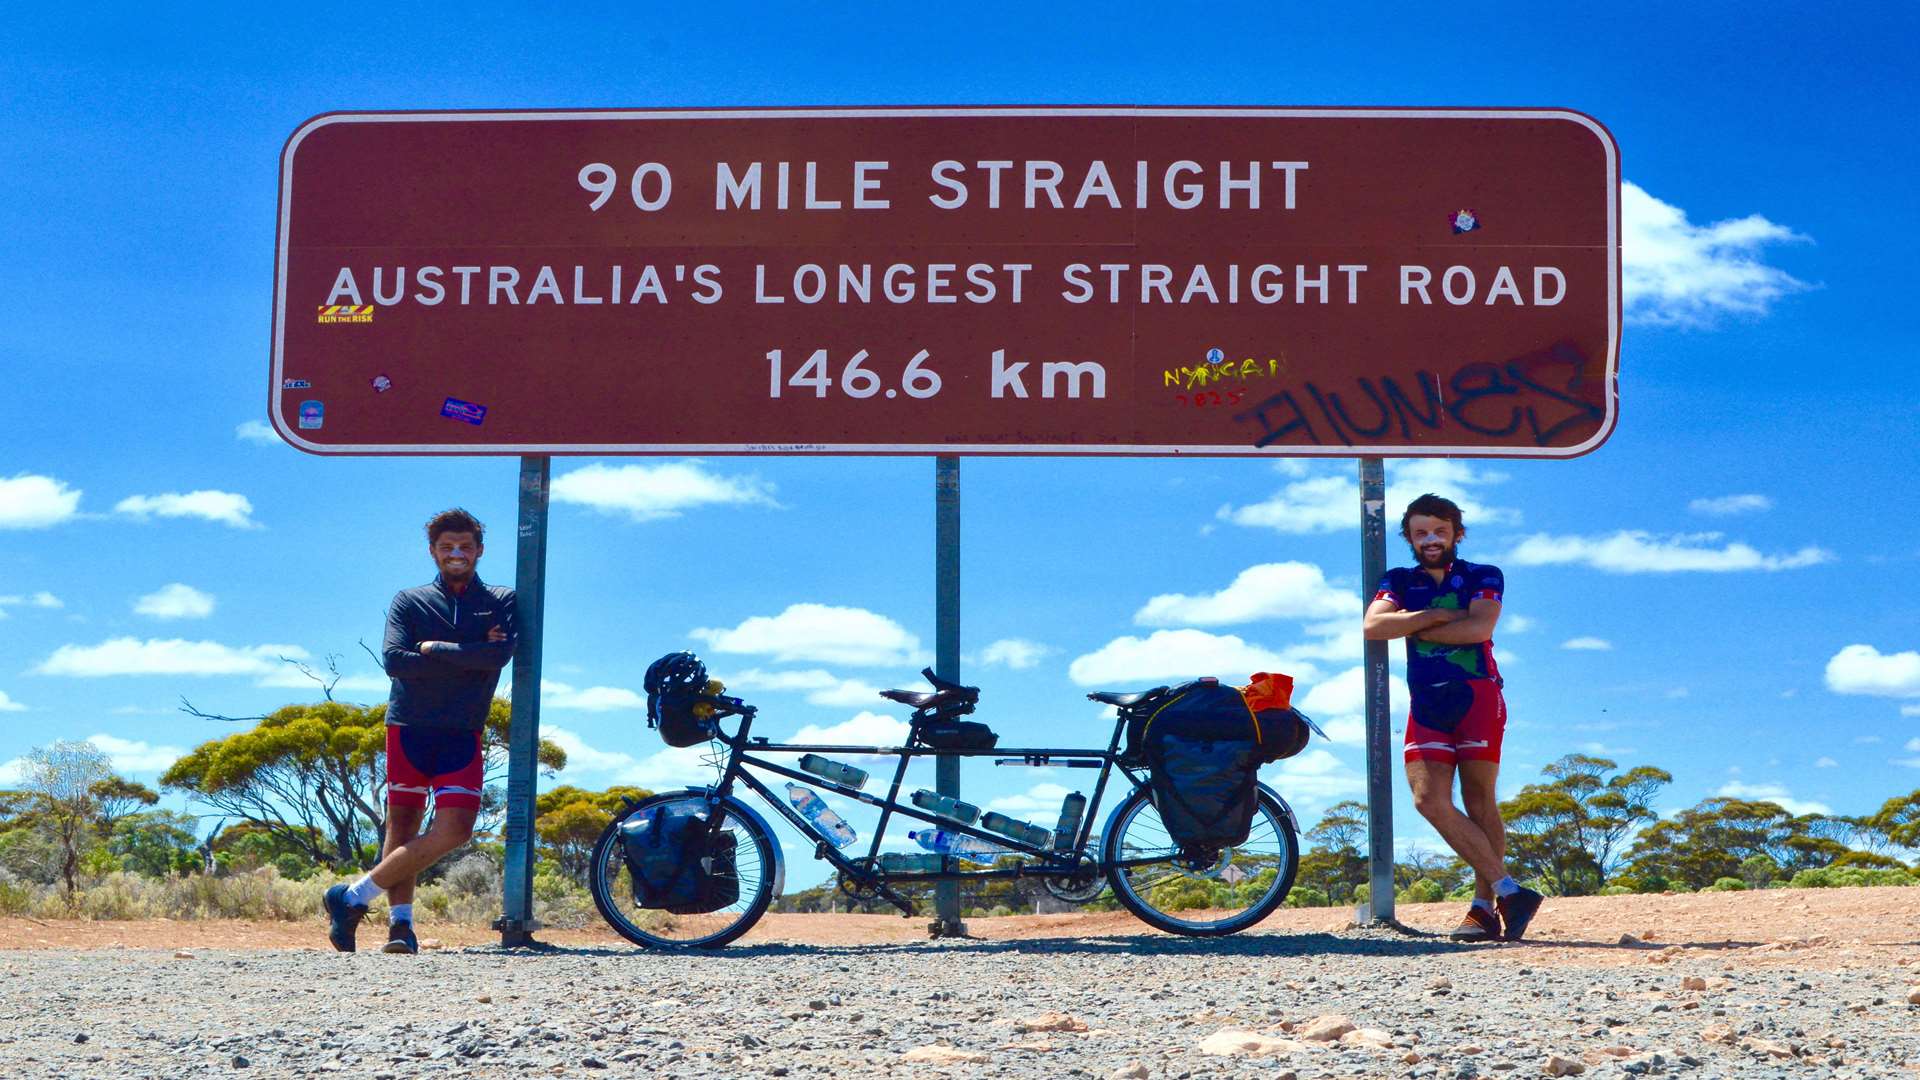 The Tandem Men, John Whybrow (left) and George Agate, ready to take on Australia's longest straight road